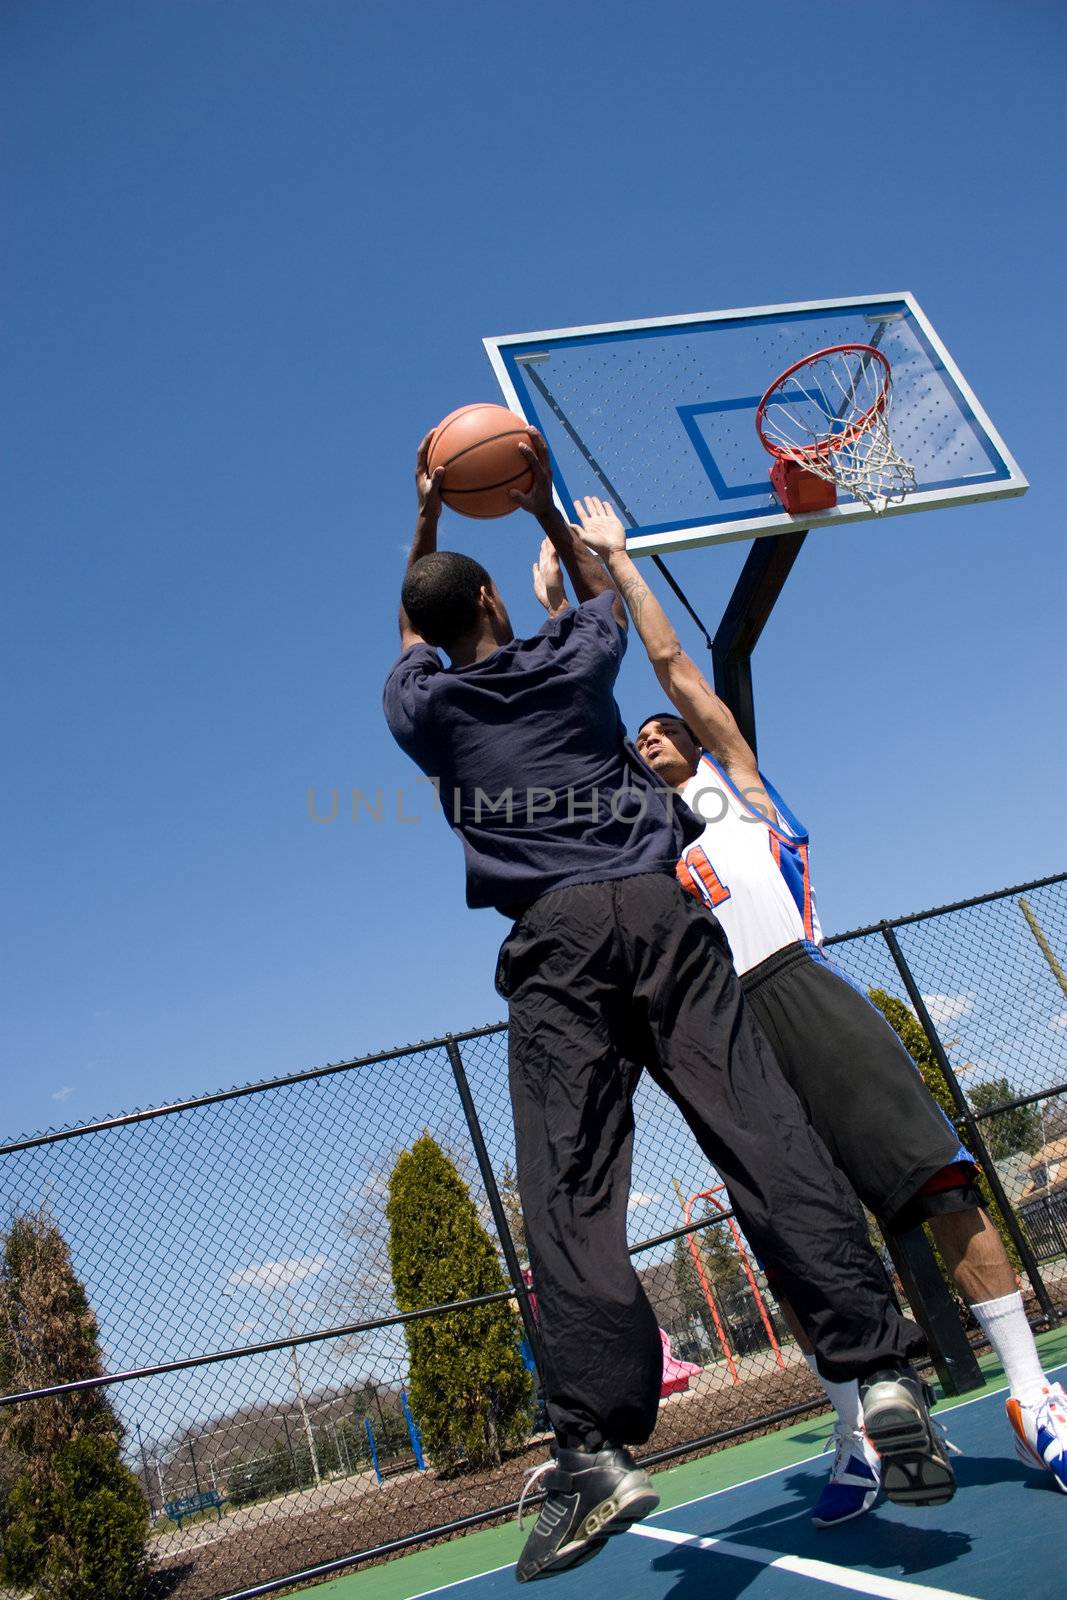 Man Playing Basketball by graficallyminded